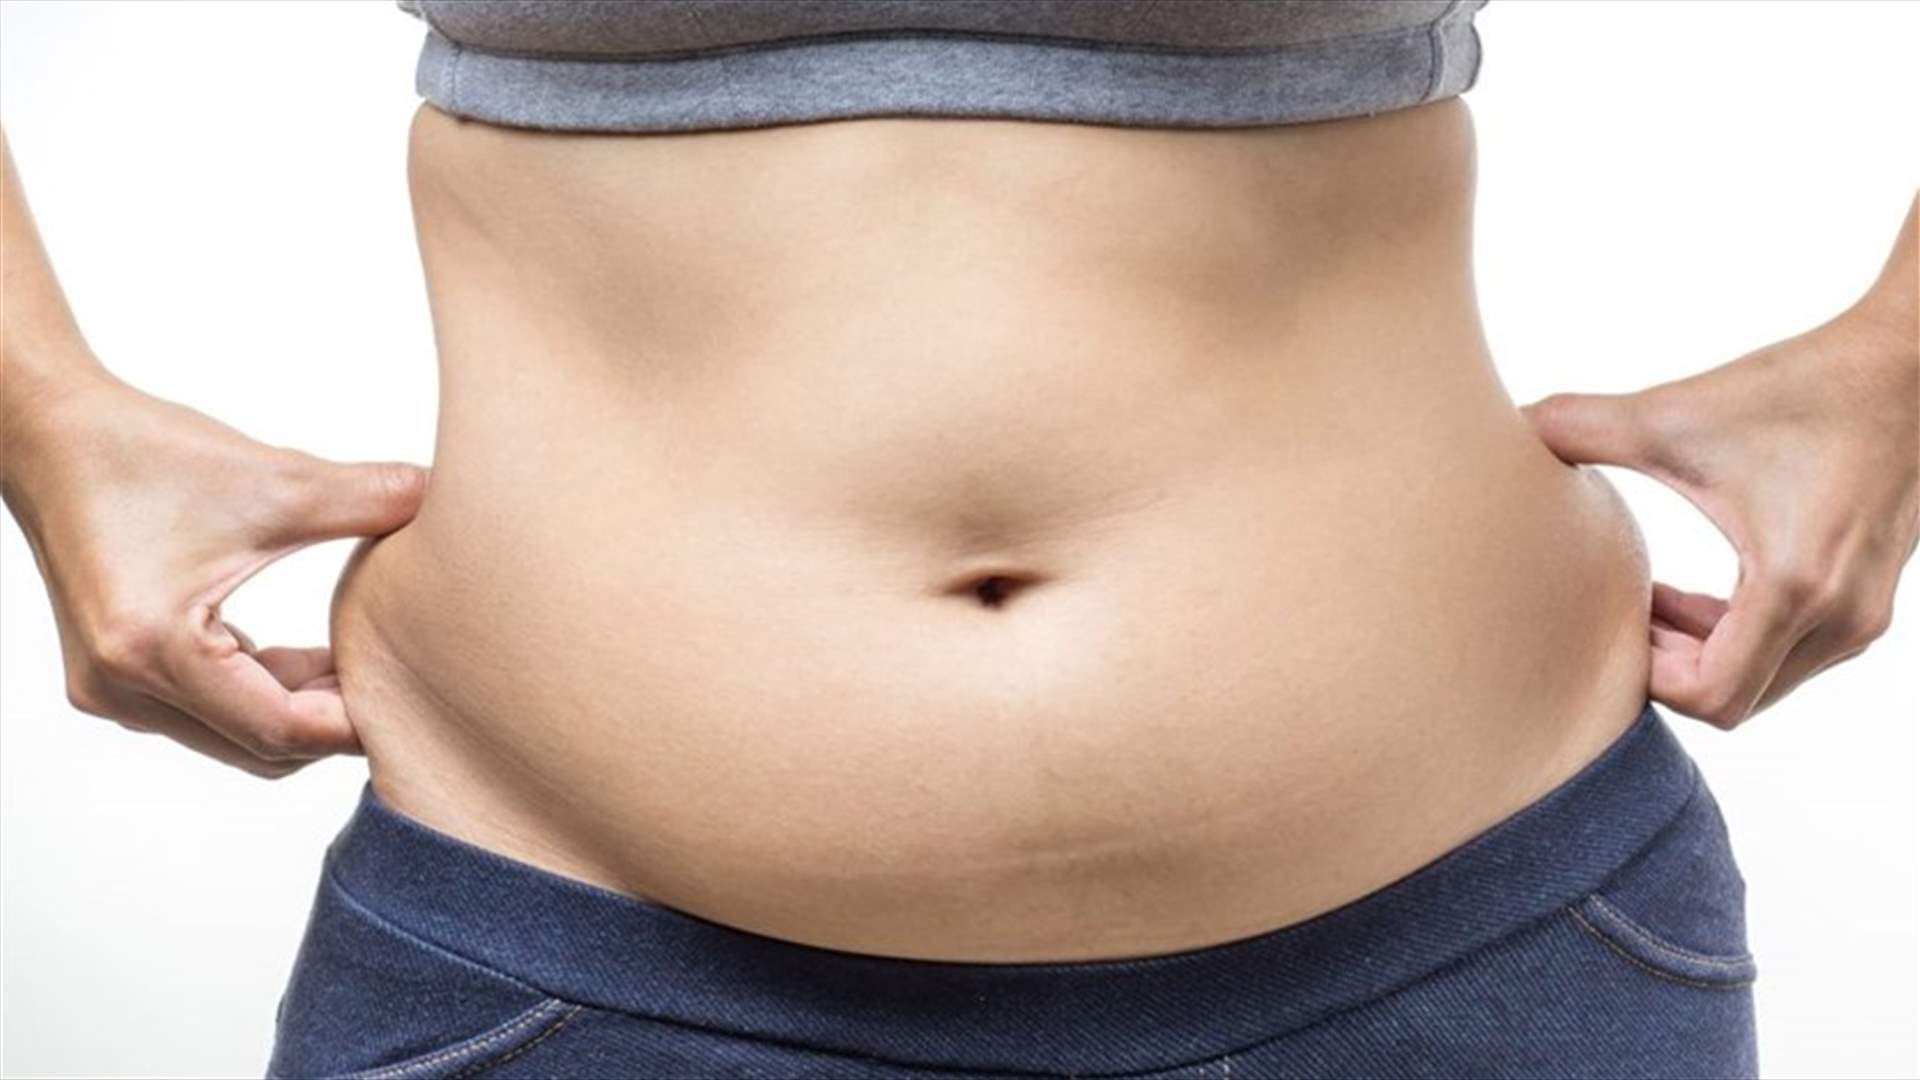 Larger Waistline Can Increase Anxiety In Middle-Aged Women- New Study